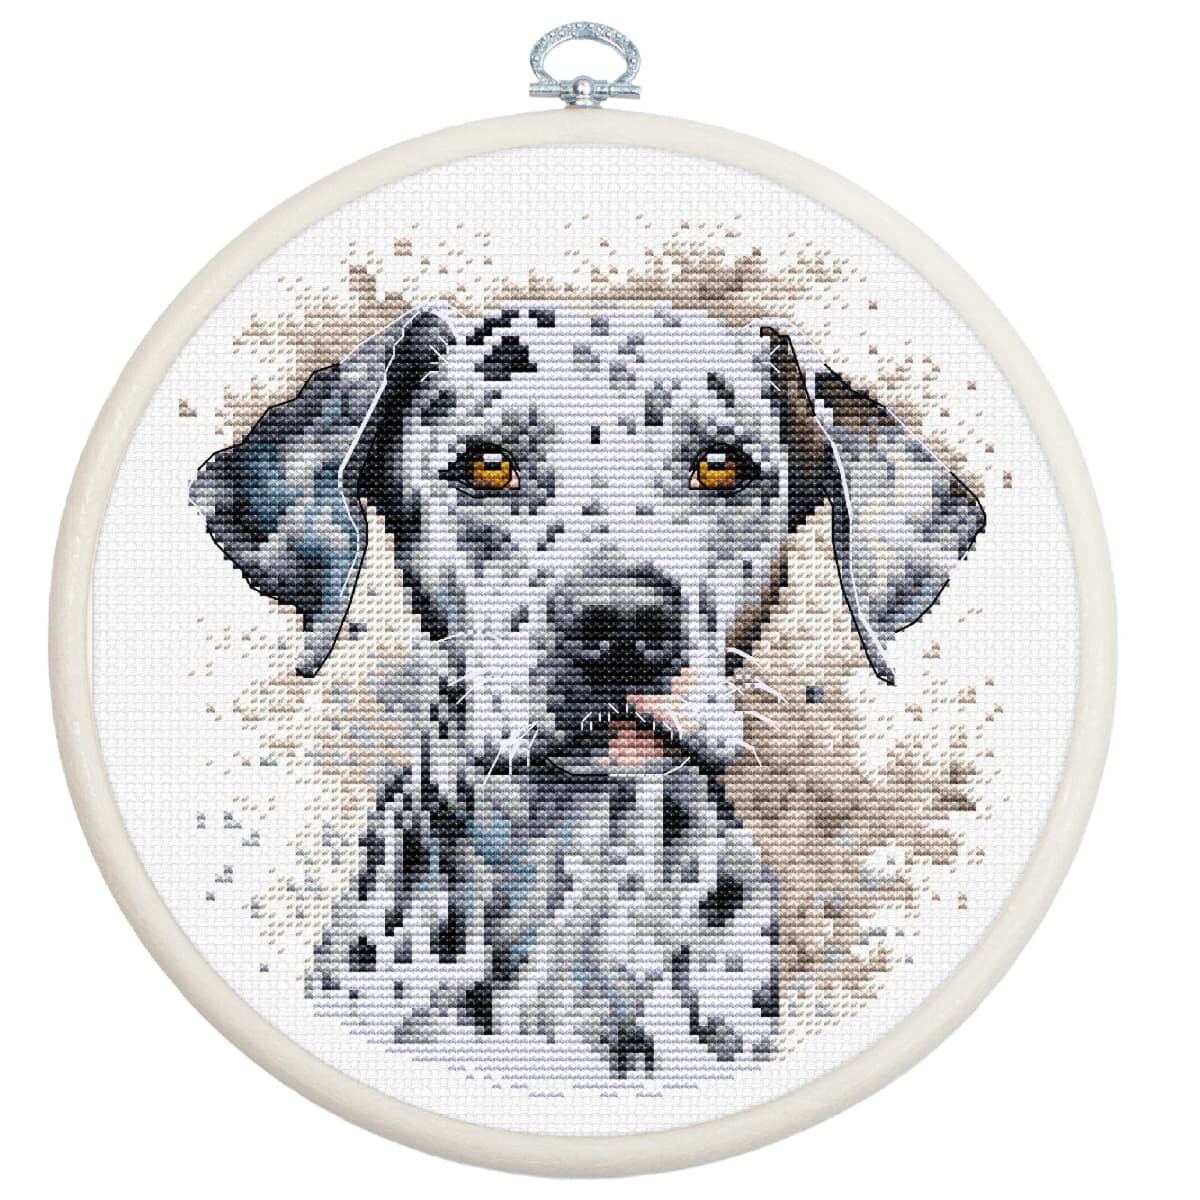 A round embroidery hoop holds a cross-stitch picture of a...